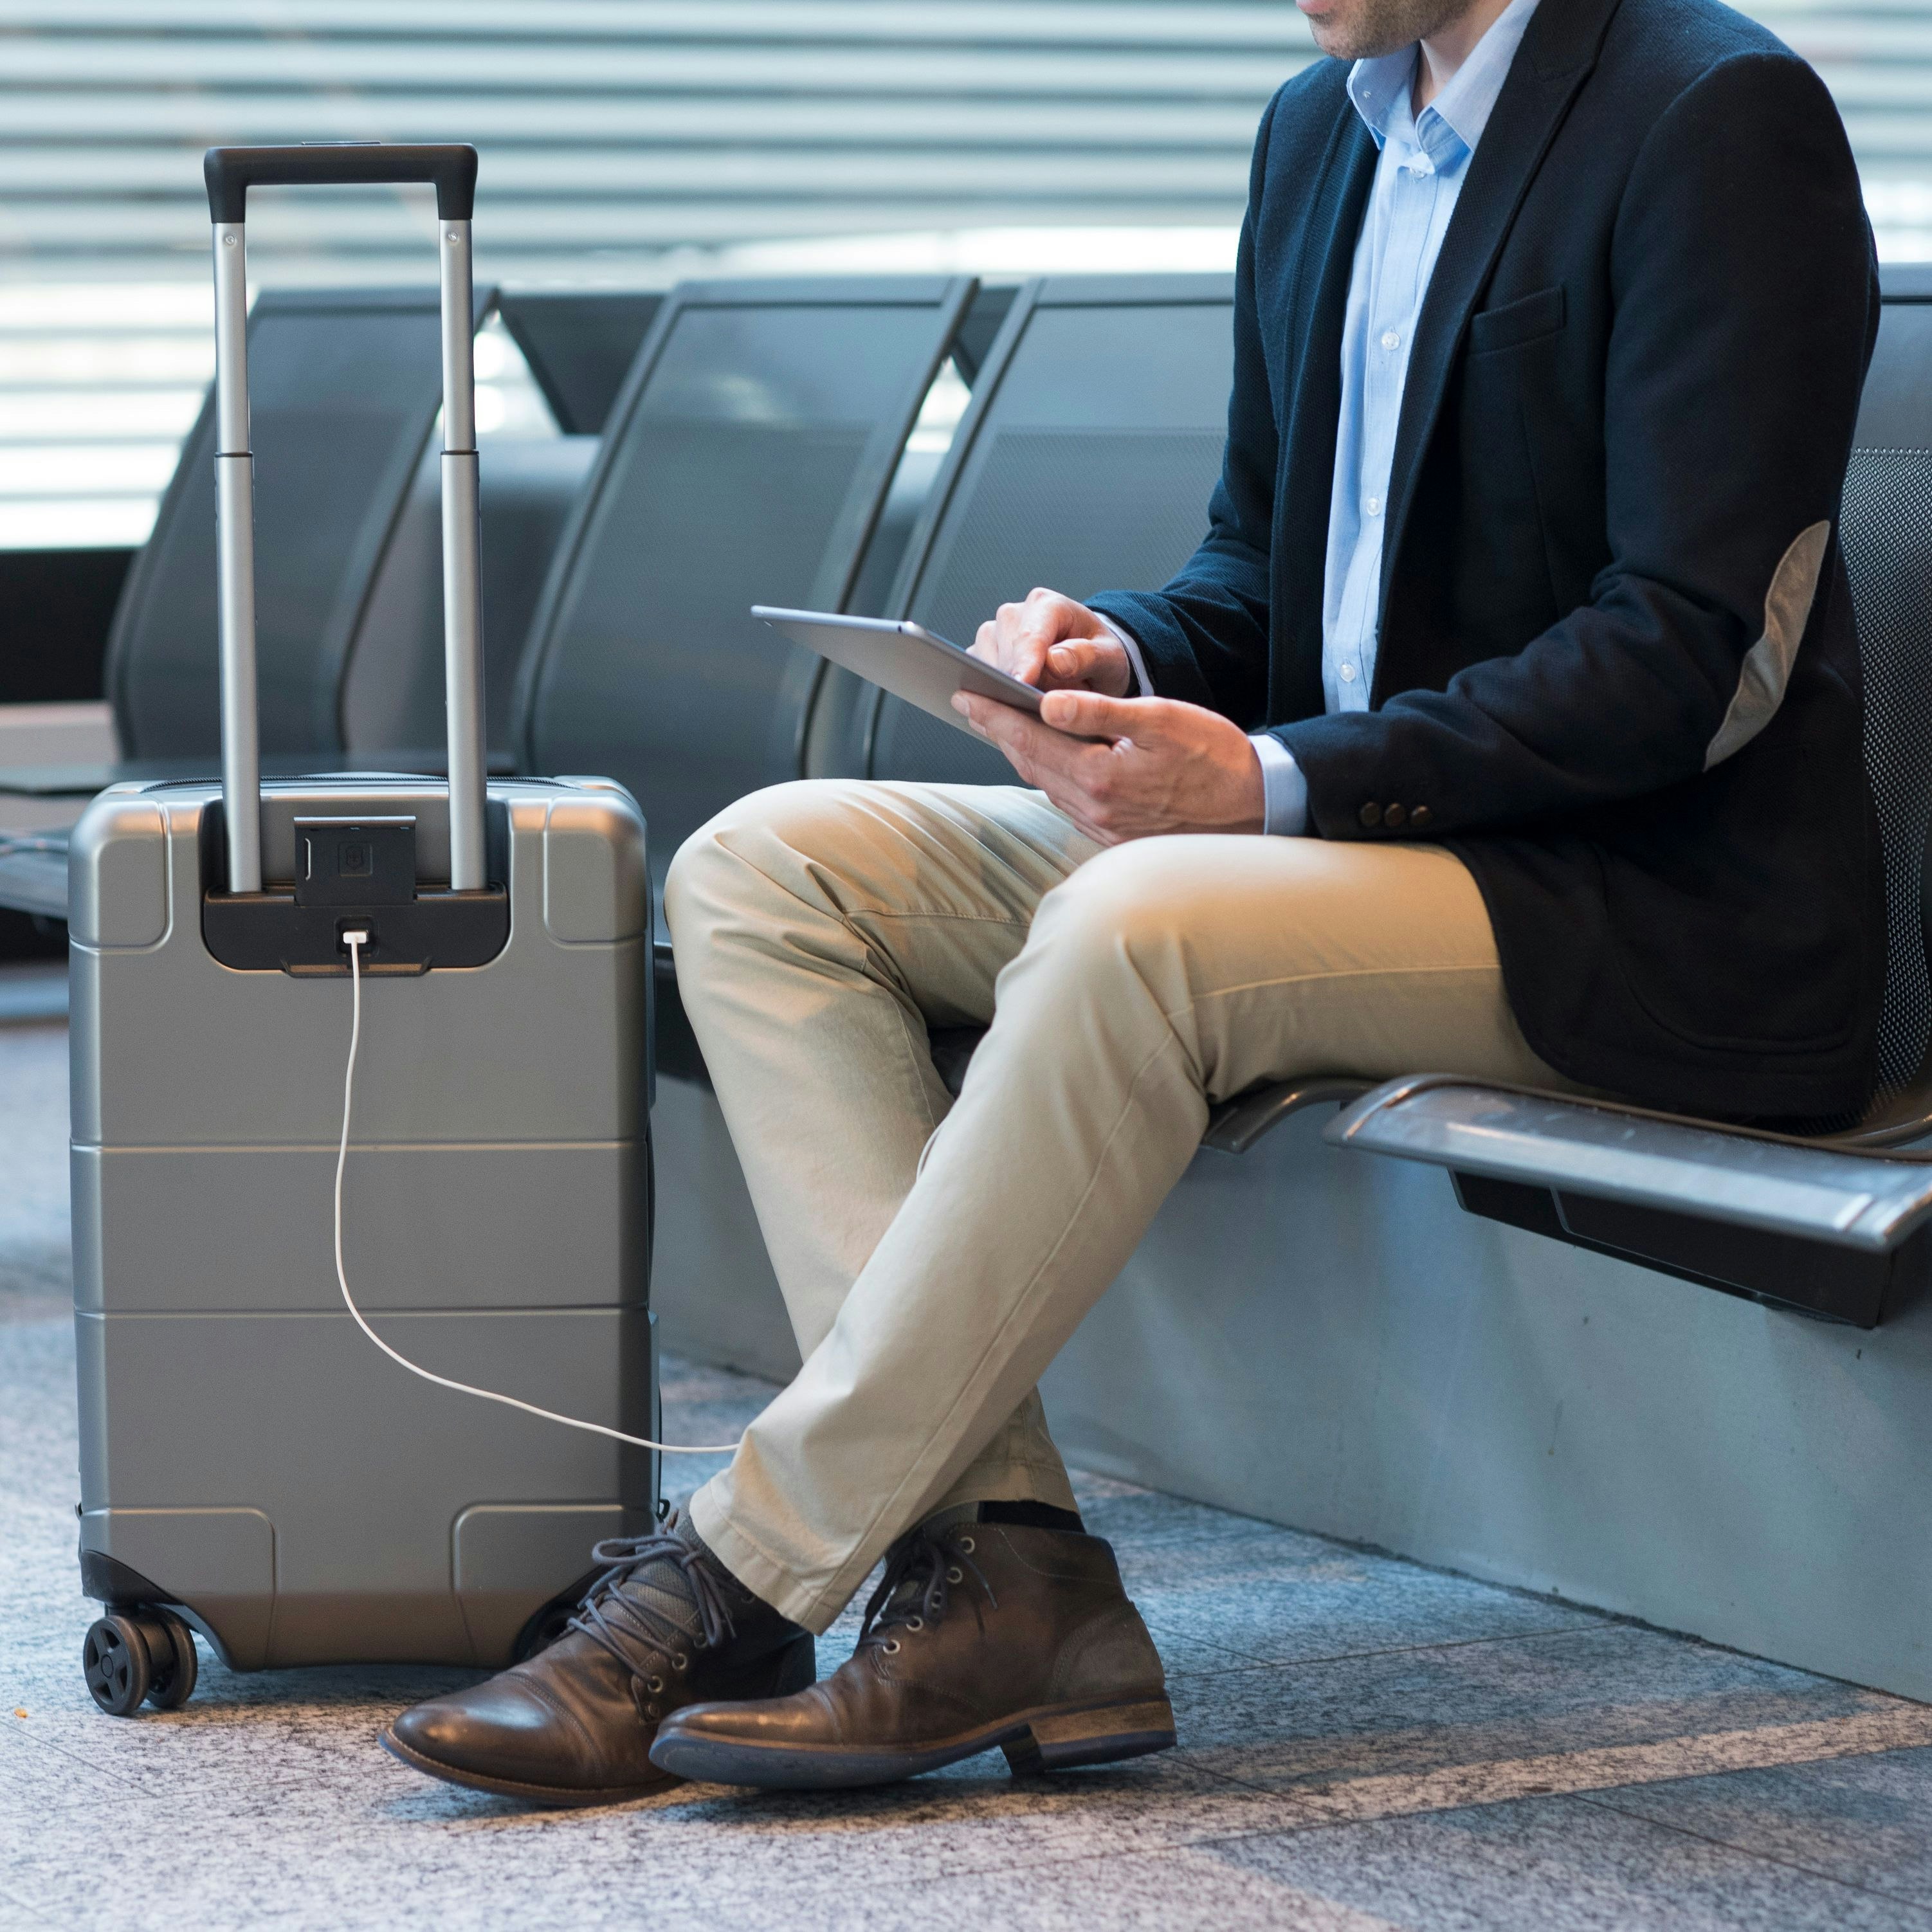 Businessman at airport with Victorinox luggage charging tablet